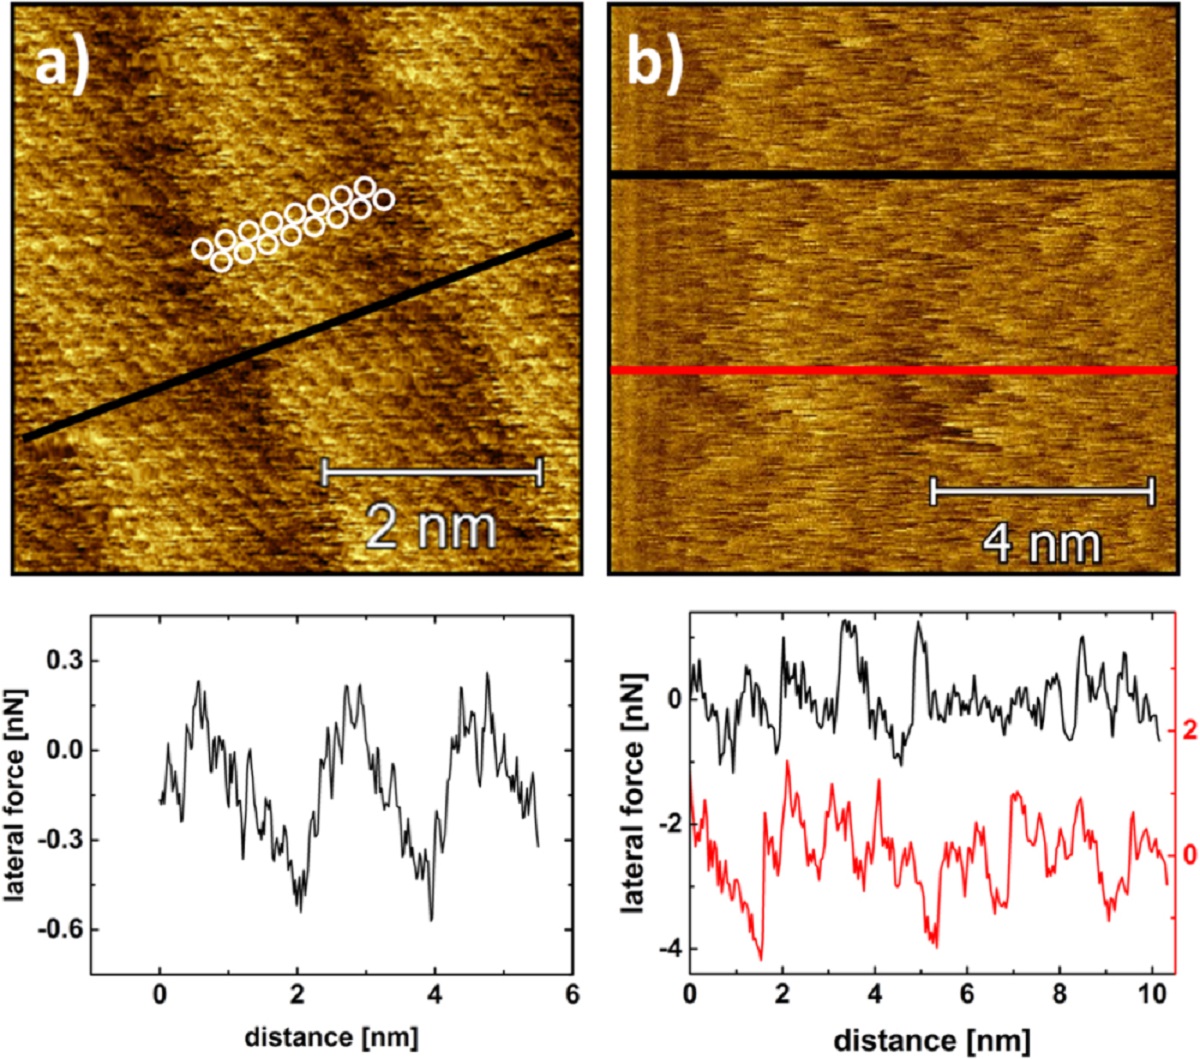  Figure 3 from “Single layer graphene induces load-bearing molecular layering at the hexadecane-steel interface” by G Krämer et al.:
 High-resolution lateral force maps recorded in hexadecane with a normal force of 3 nN. (a) On graphene, the adsorbed hexadecane molecules arrange in form of lamellae with a width of 2.1 nm. The cross-section was taken along the line indicated. The schematic depiction of the orientation of one hexadecane molecule is informed by the results in [21]. (b) On the steel substrate, an irregular stick-slip pattern with a characteristic slip length of about 1 nm is observed. The two cross-sections are taken the along the lines indicated in the respective color. 